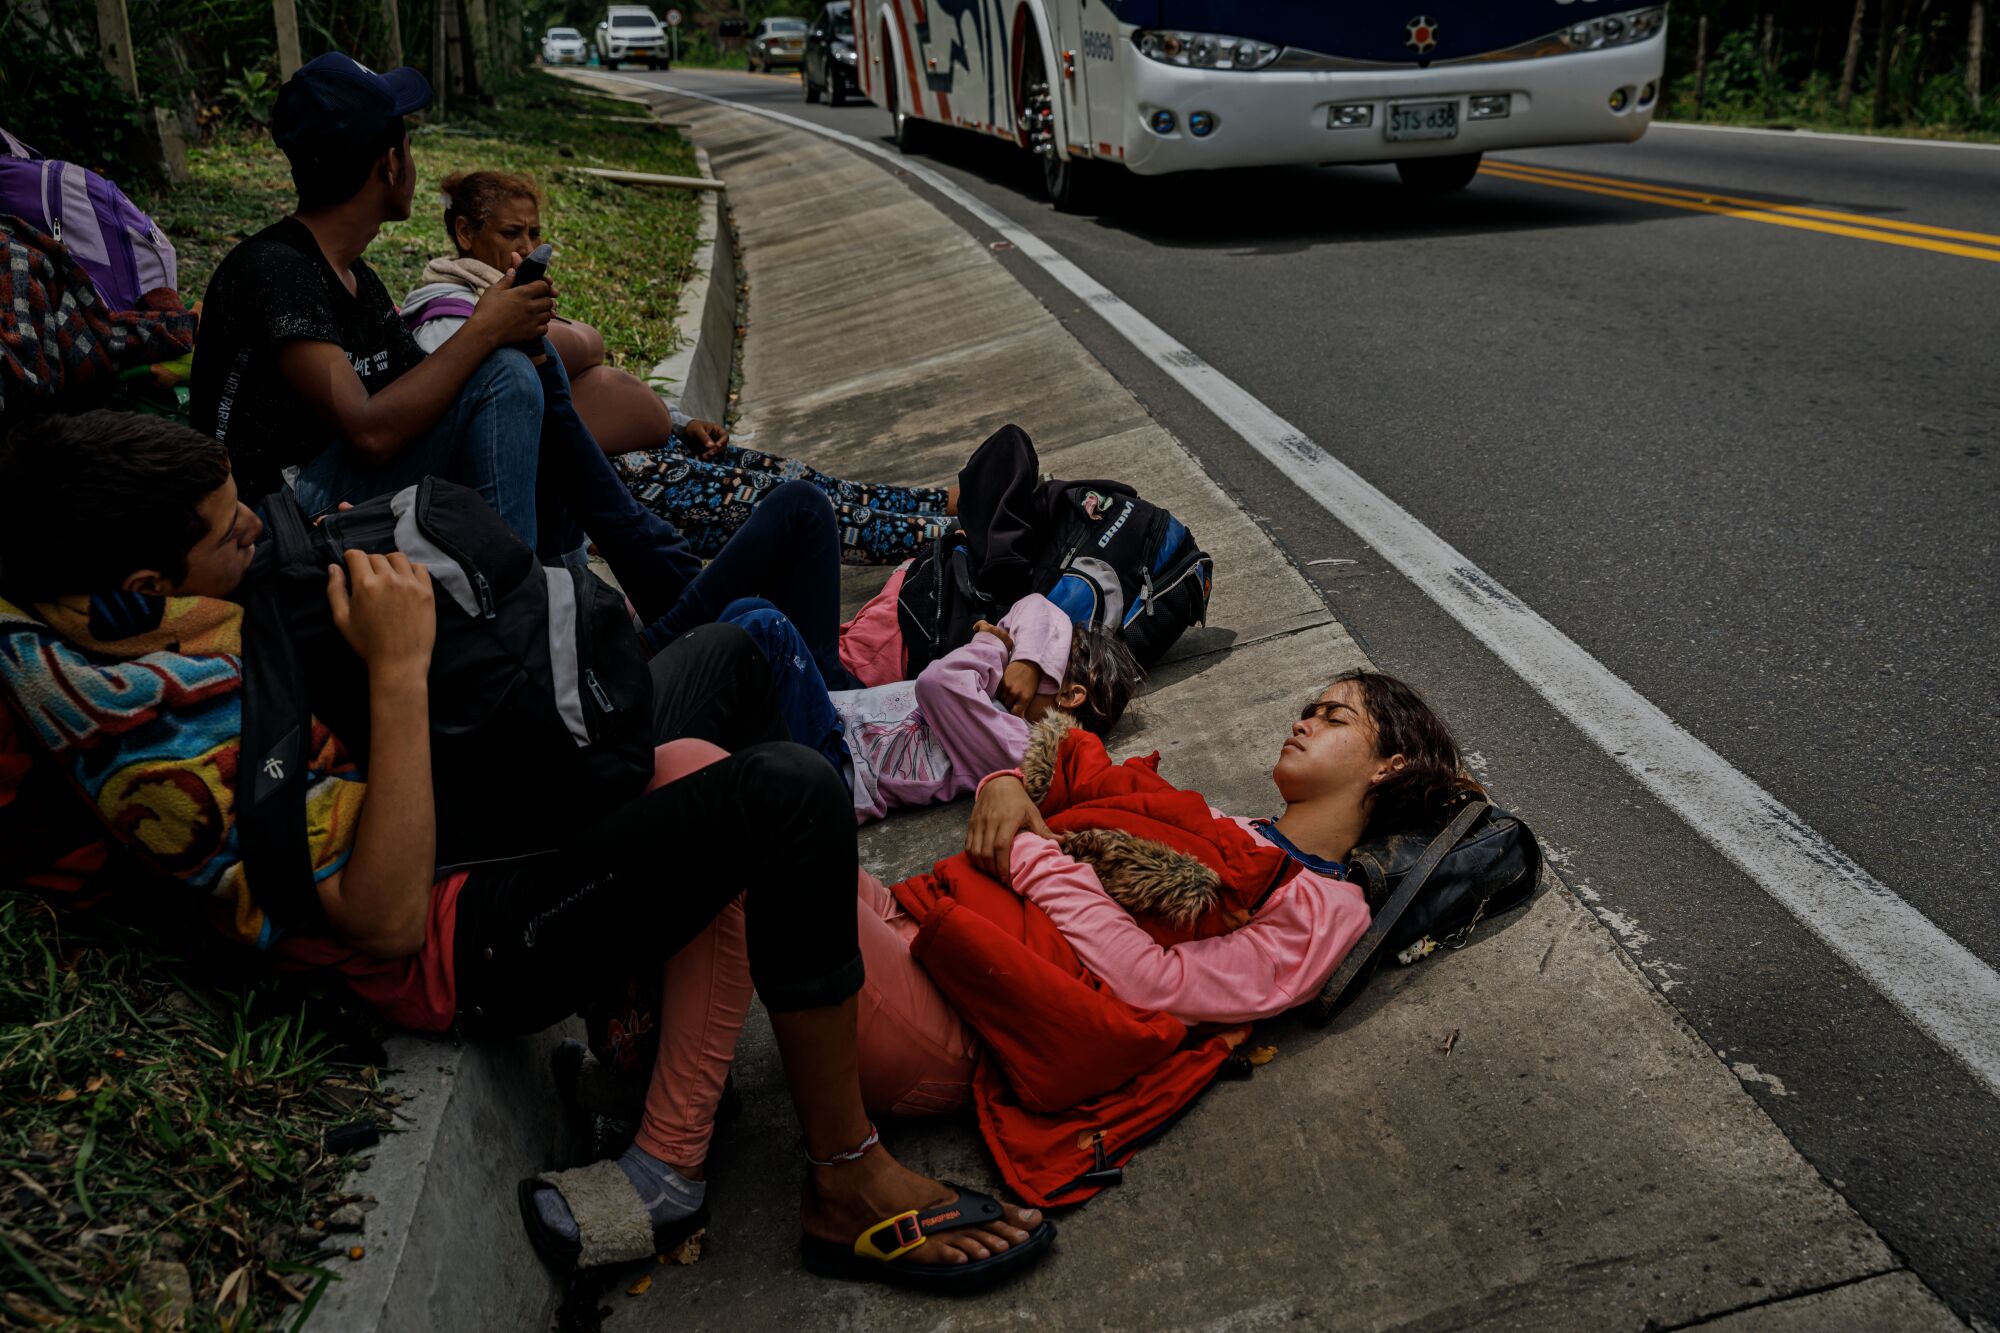 Delimar Fonseca, 18, rests with her family and friends on the side of the Route 55 near Jimenez, Colombia as vehicles speed past.